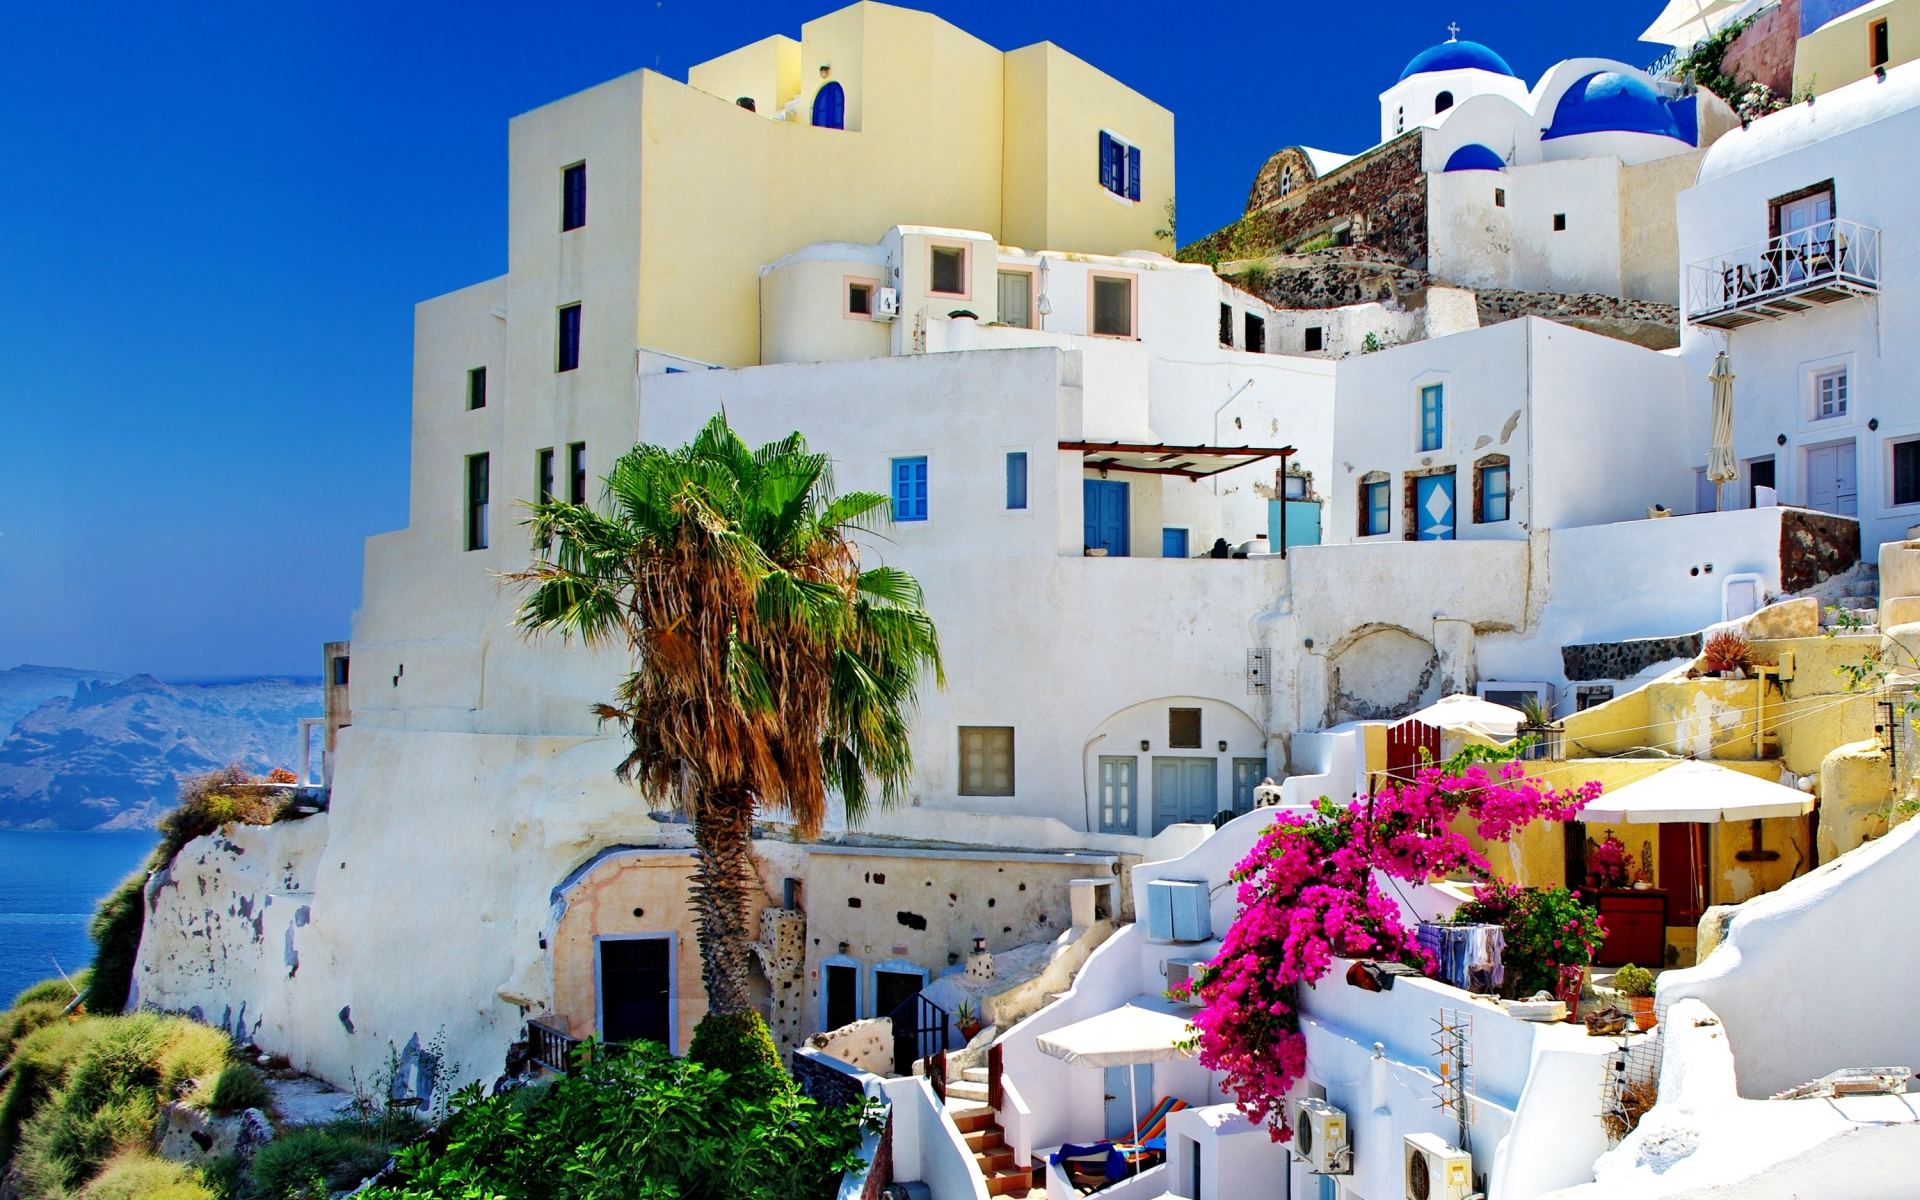 santorini, greece, towns, man made, architecture, building, place, tropical